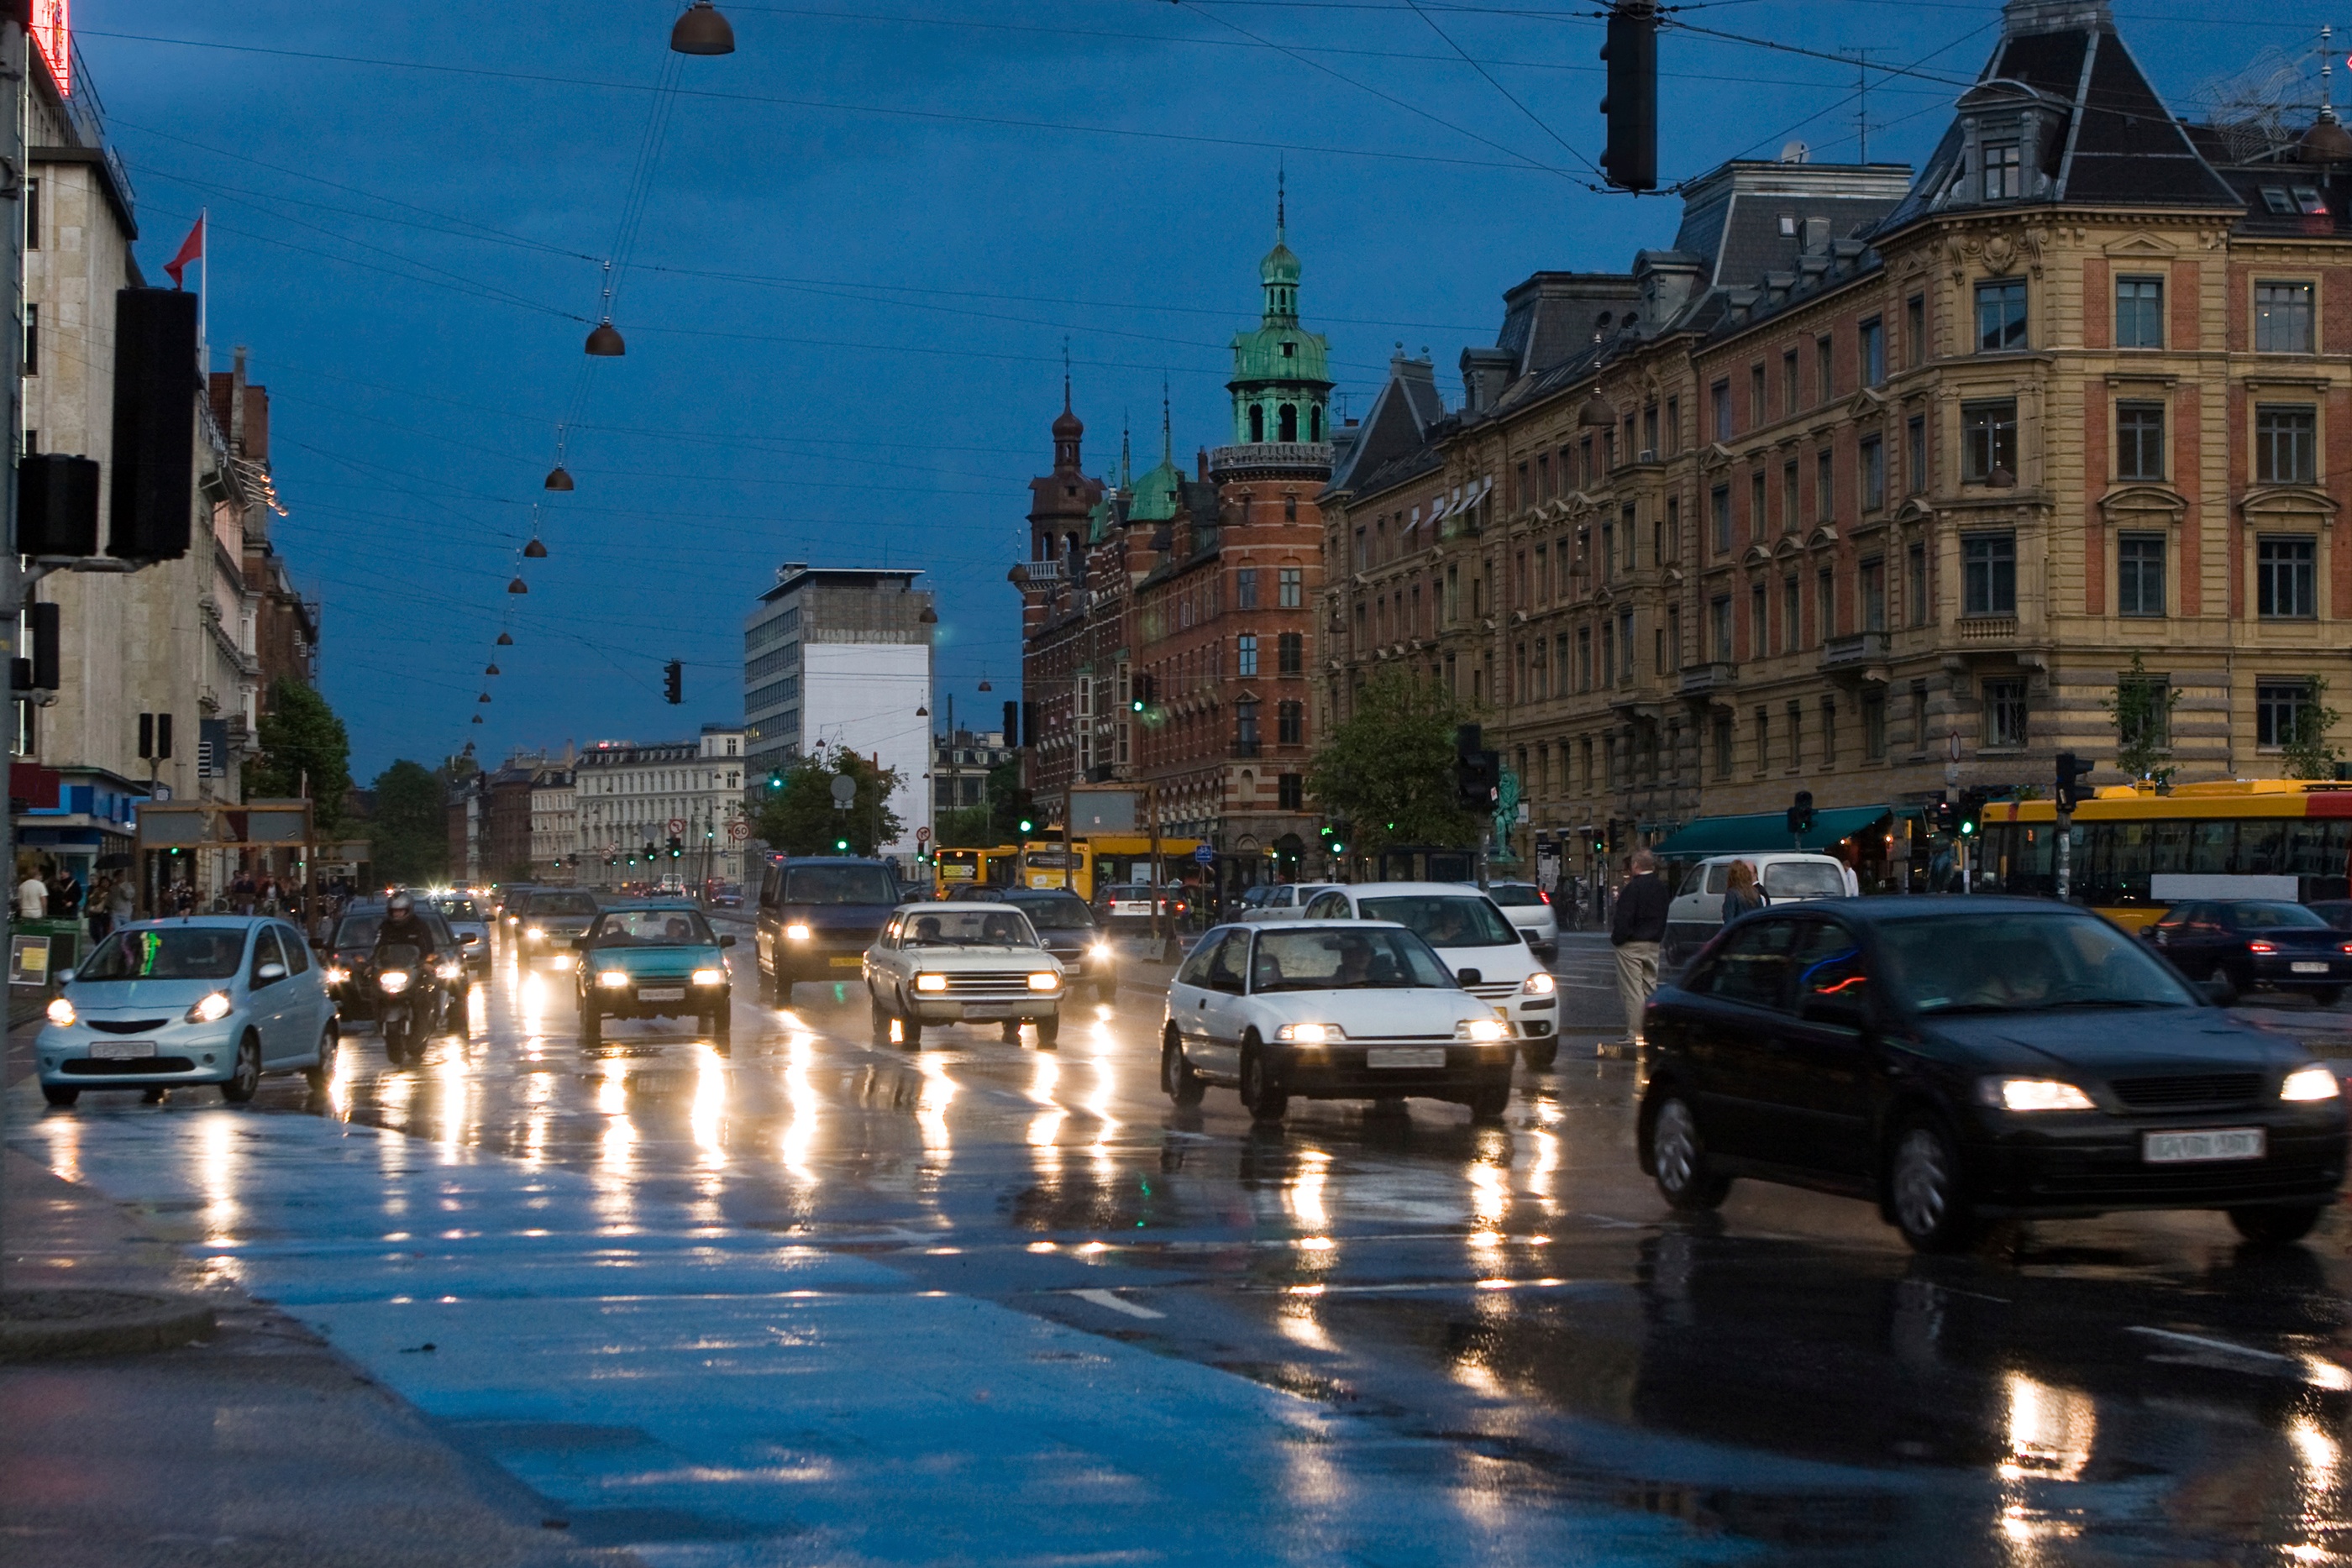 Rush hour in Copenhagen, Denmark's most populous city, and one of the many locations served by served by TeliaSonera's global network.